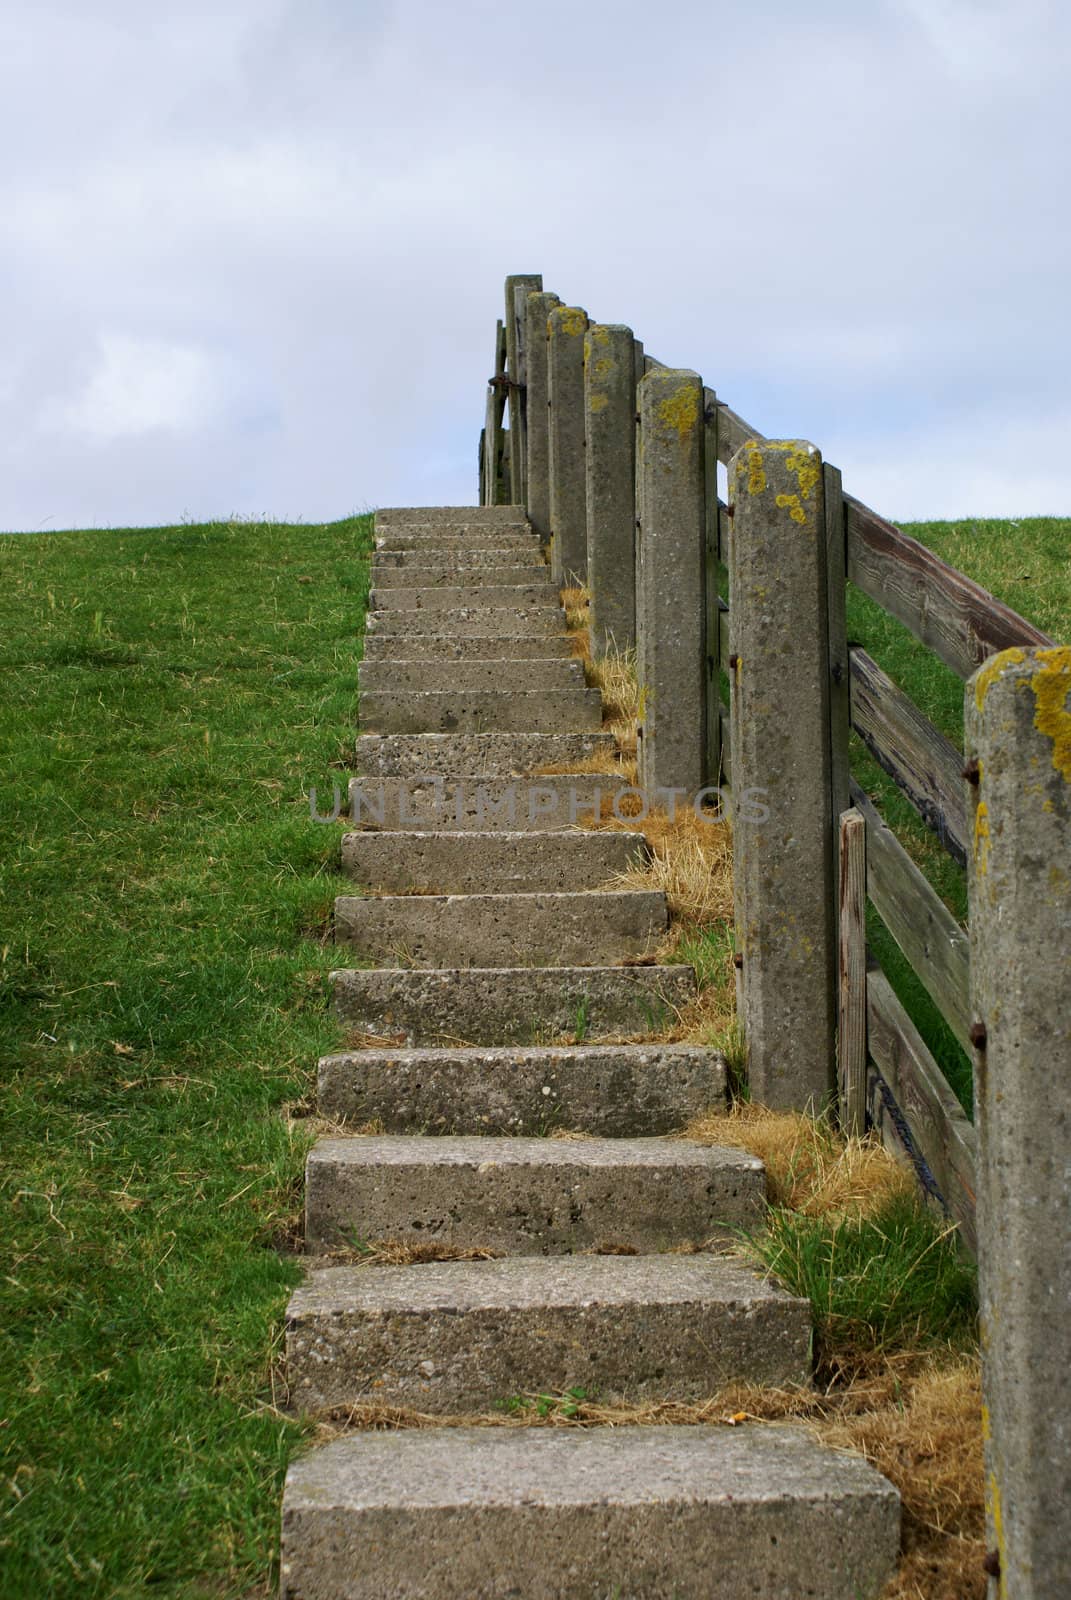 Stairway to get on top of a dike.